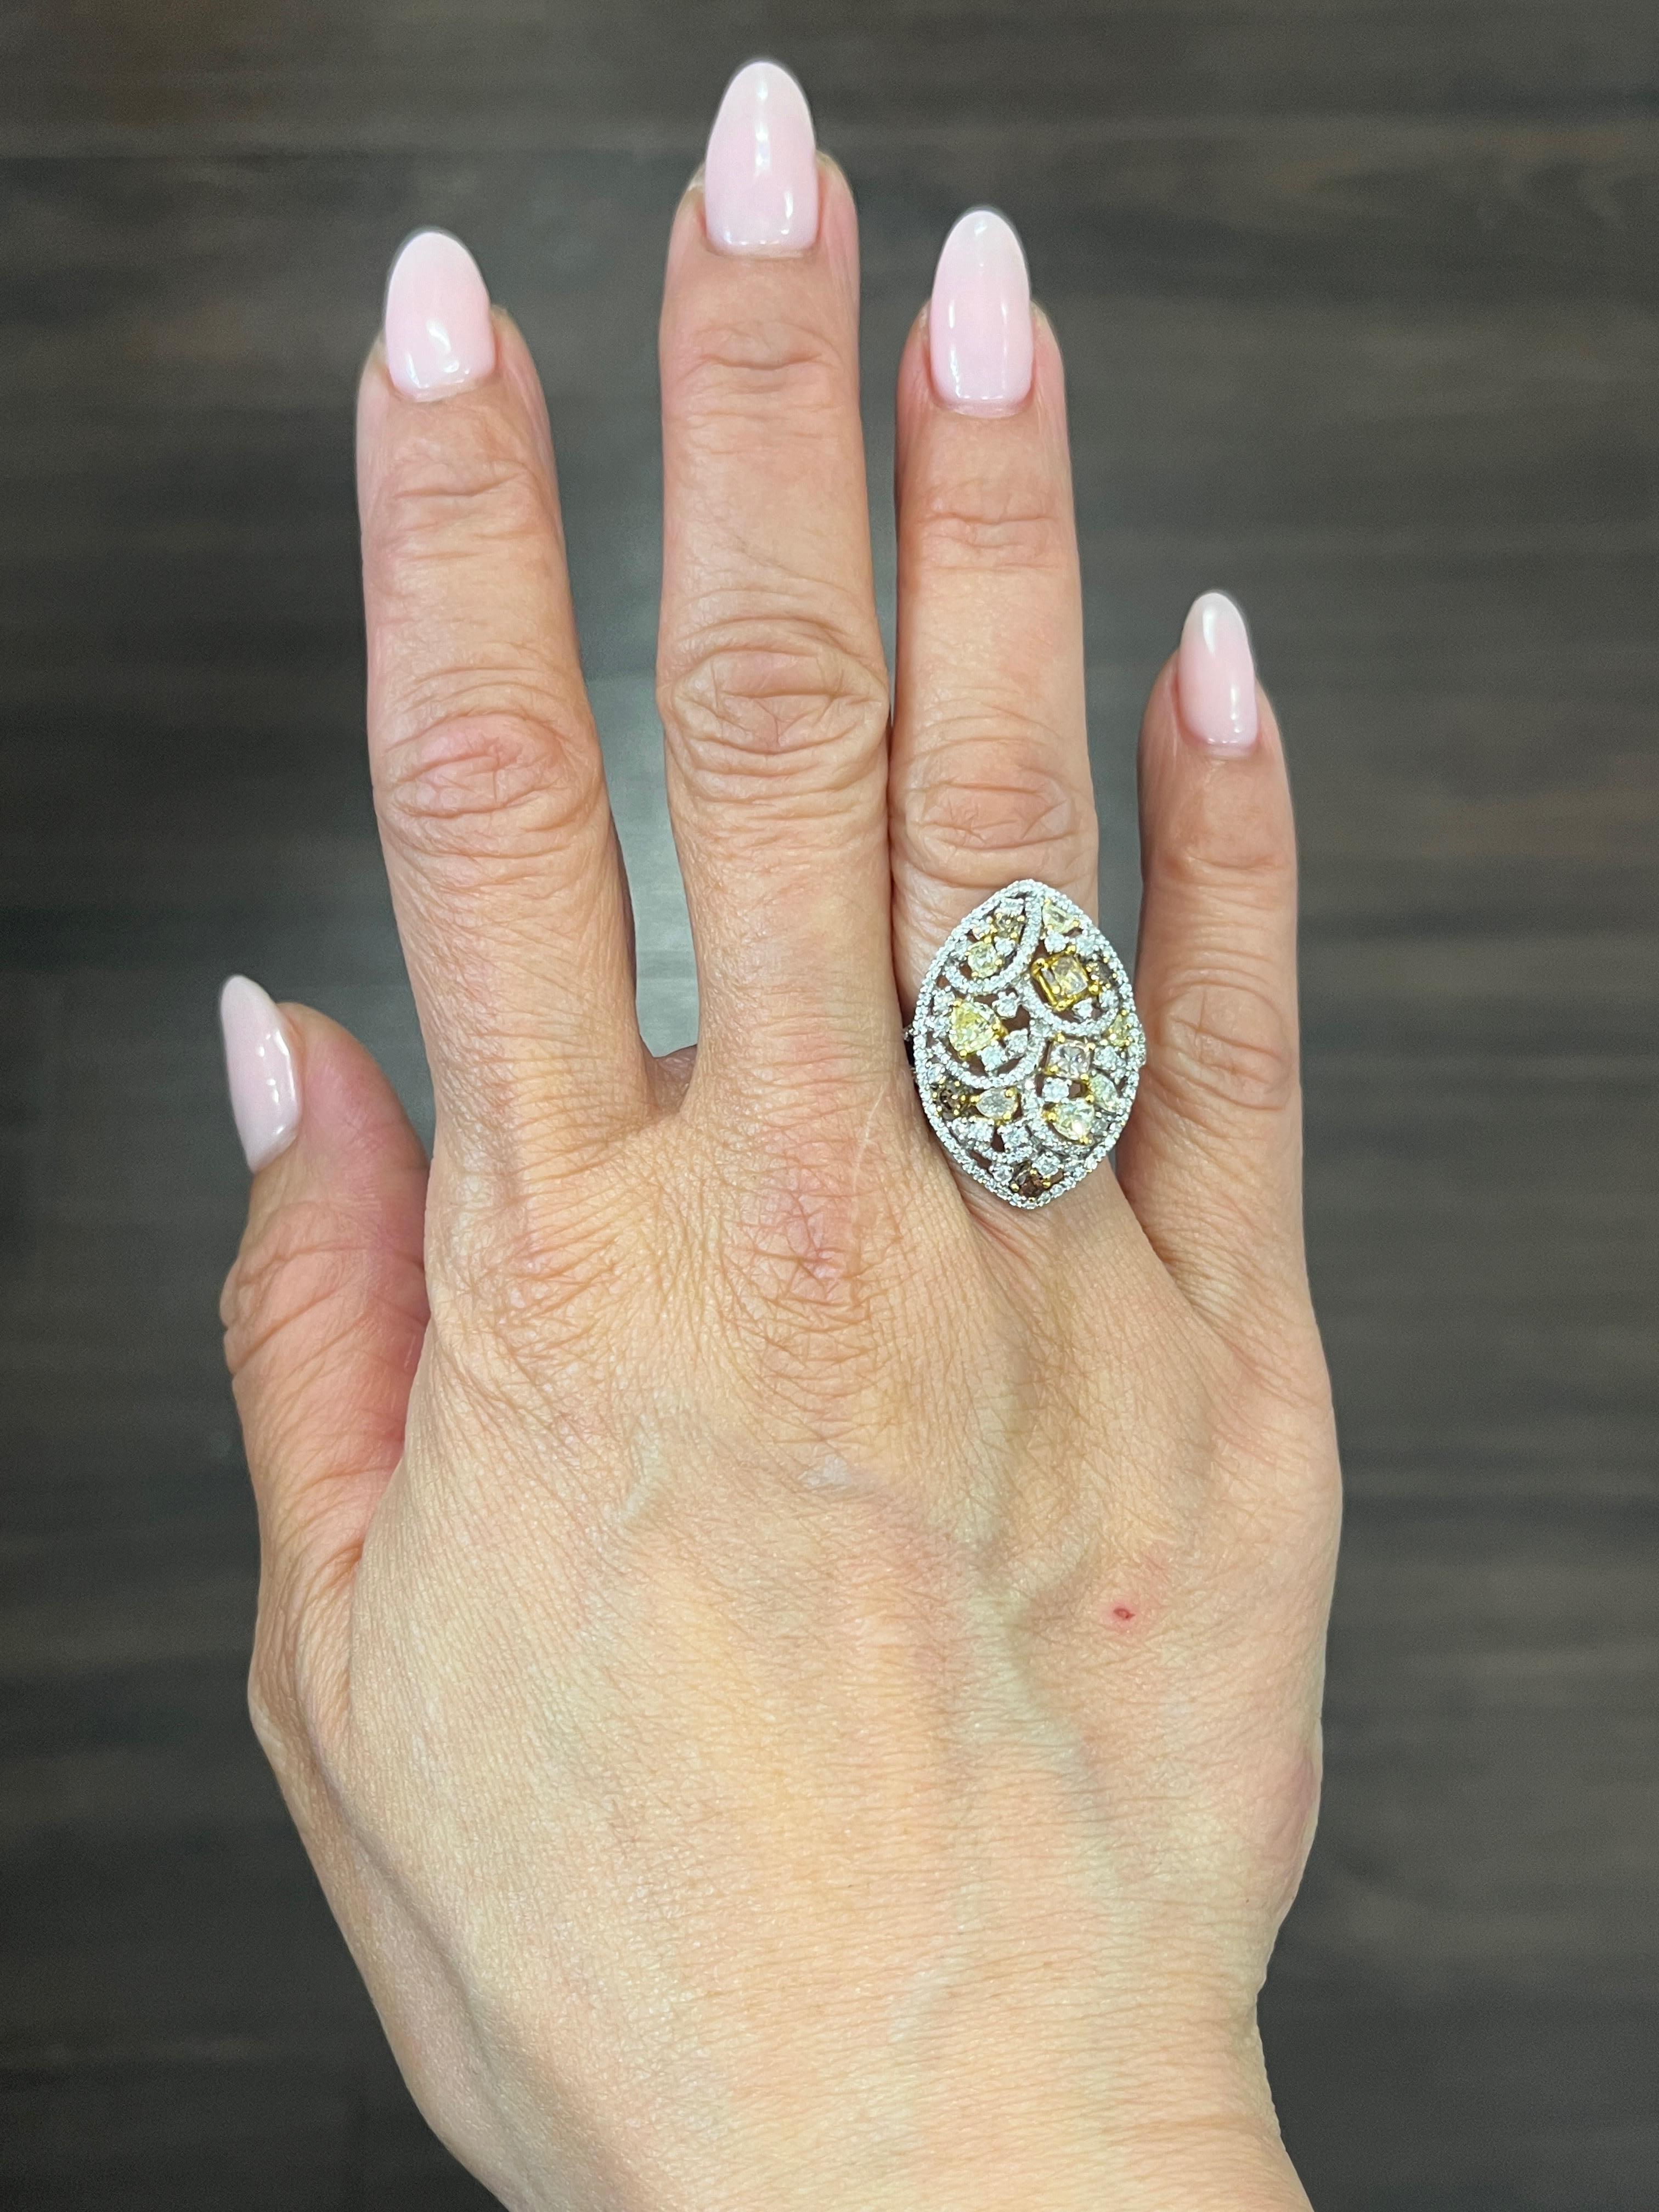 Treat yourself to this stunning 2.21 ct diamond ring, crafted from 18k white gold and boasting an array of natural brown, yellow, pink and white diamonds. The ring is size 6.5 and can be resized, and features a mix of VS2/SI1 clarity grade diamonds